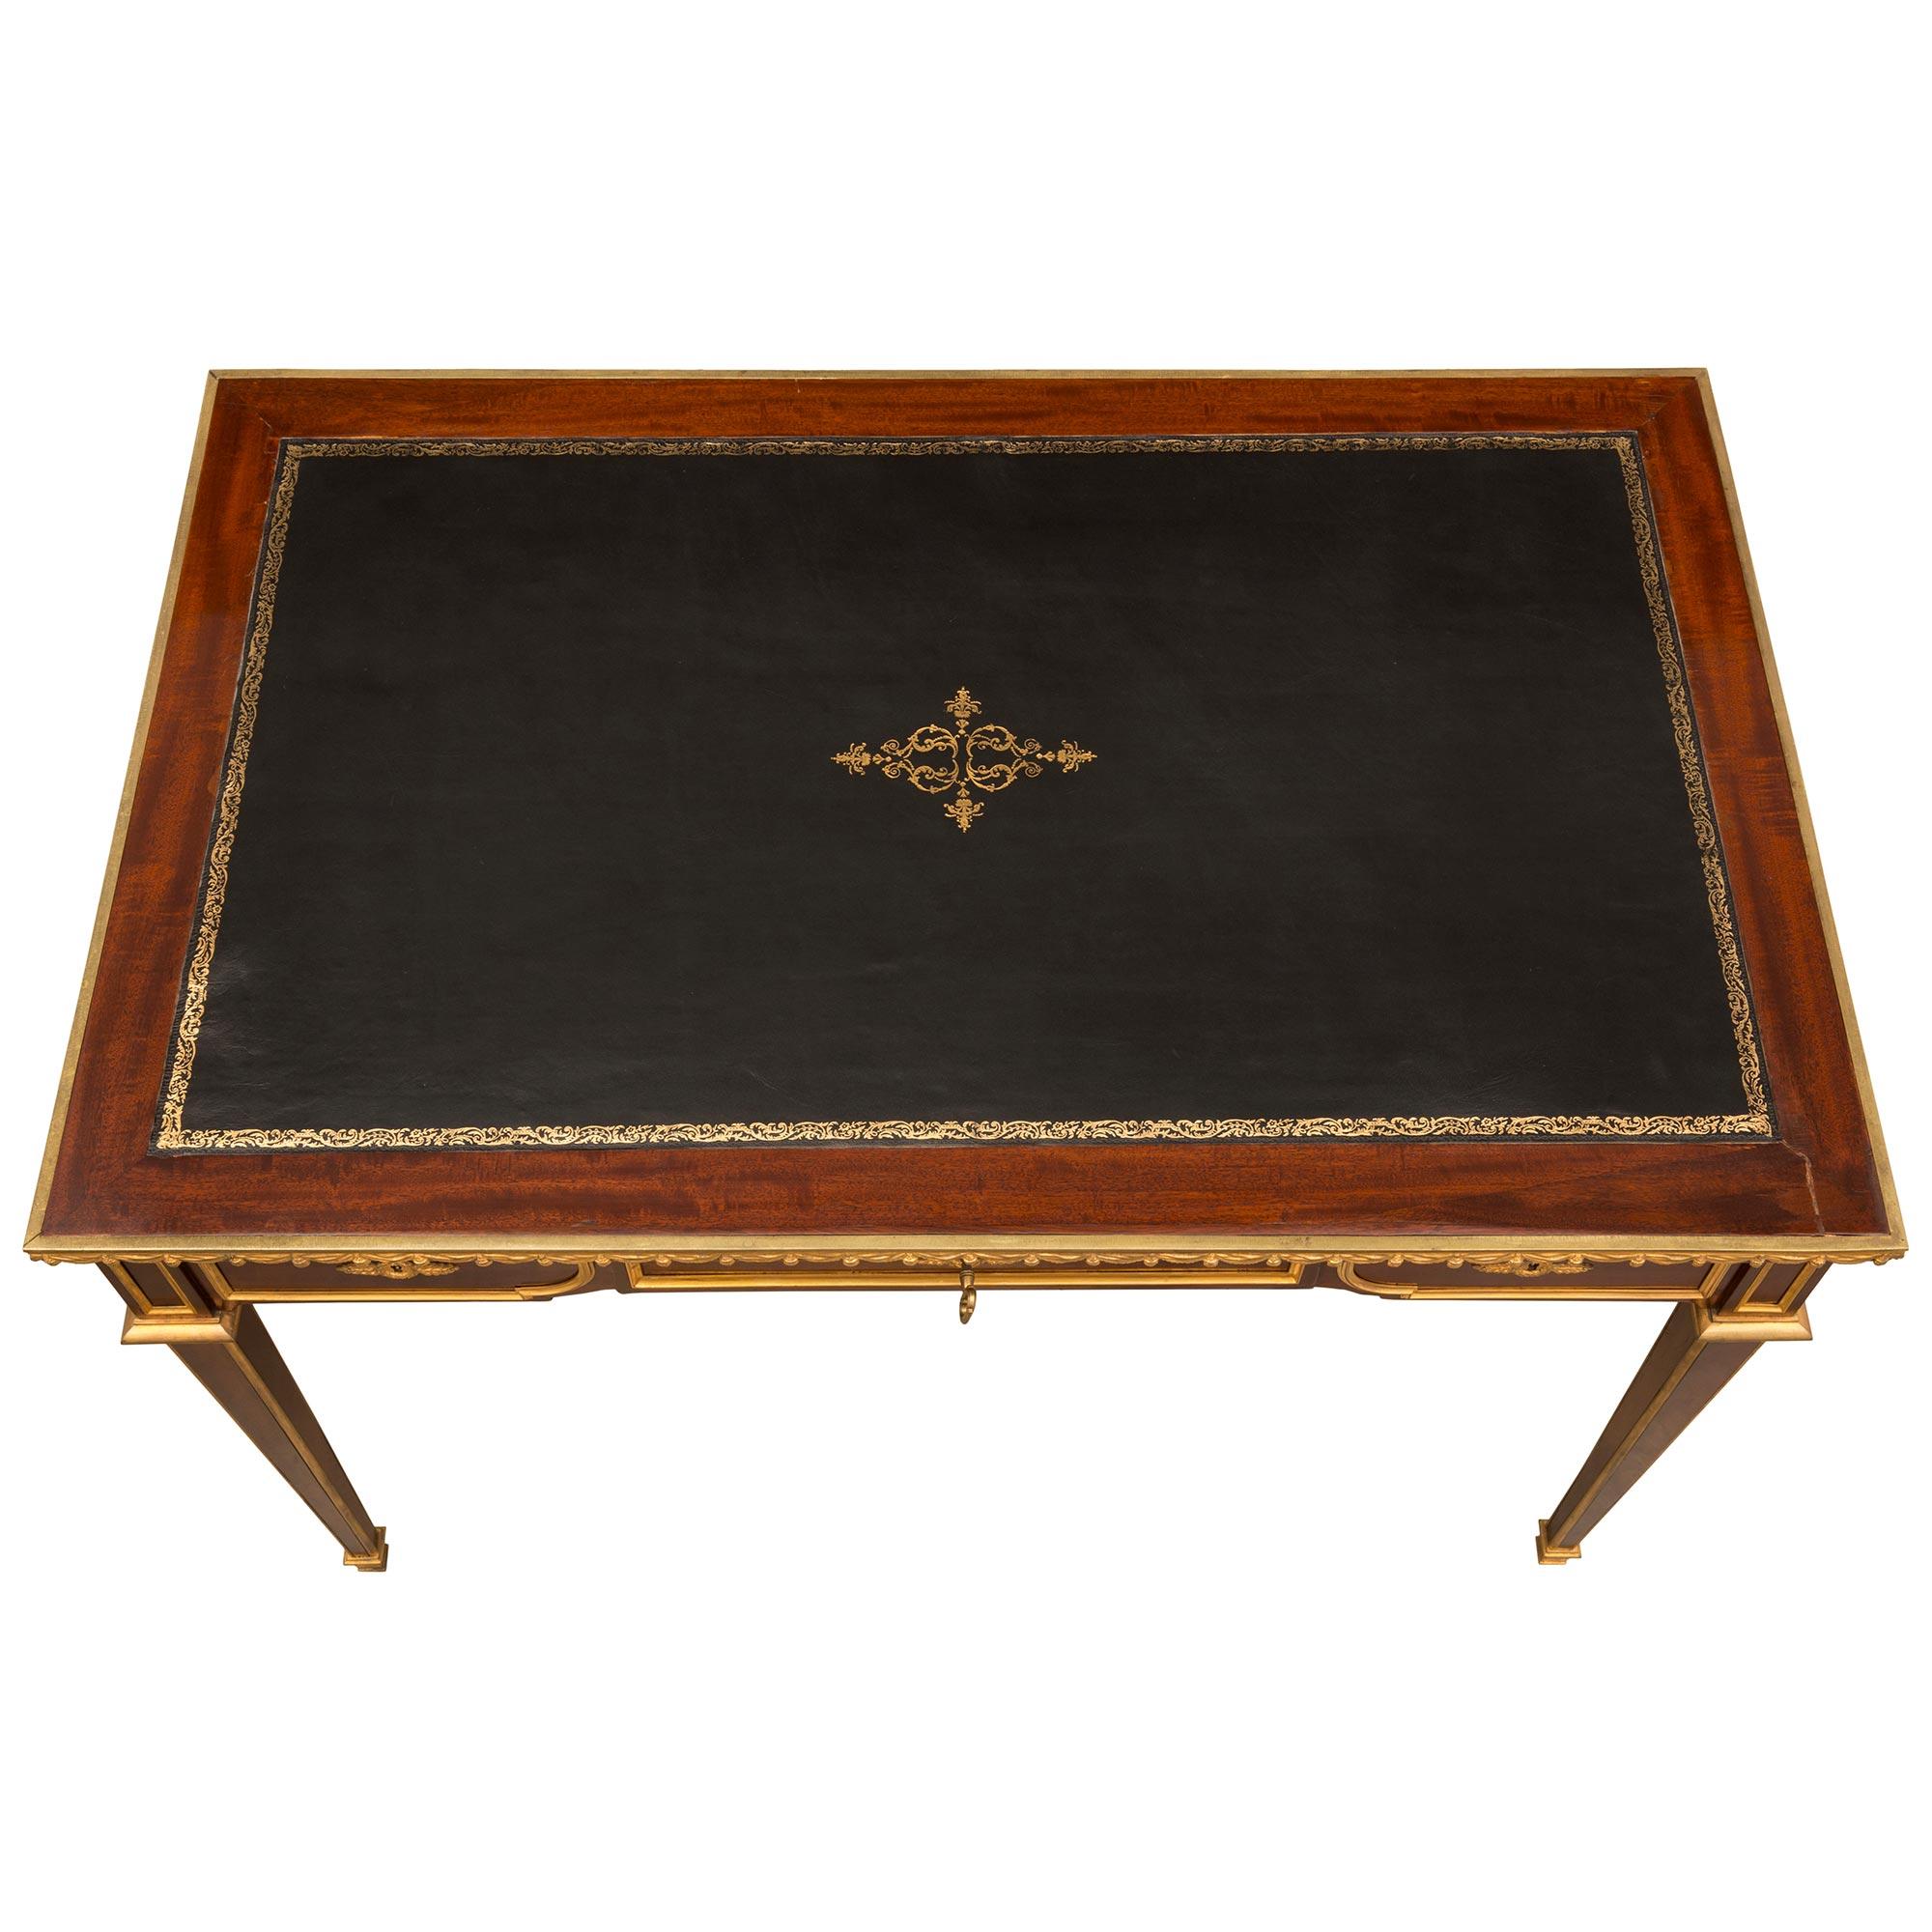 A superb French 19th century Louis XVI style mahogany and ormolu desk. The desk is raised by slender tapered legs with ormolu trim finished with ormolu sabots and top crown. The impressive apron has three drawers with ormolu keyhole escutcheons and